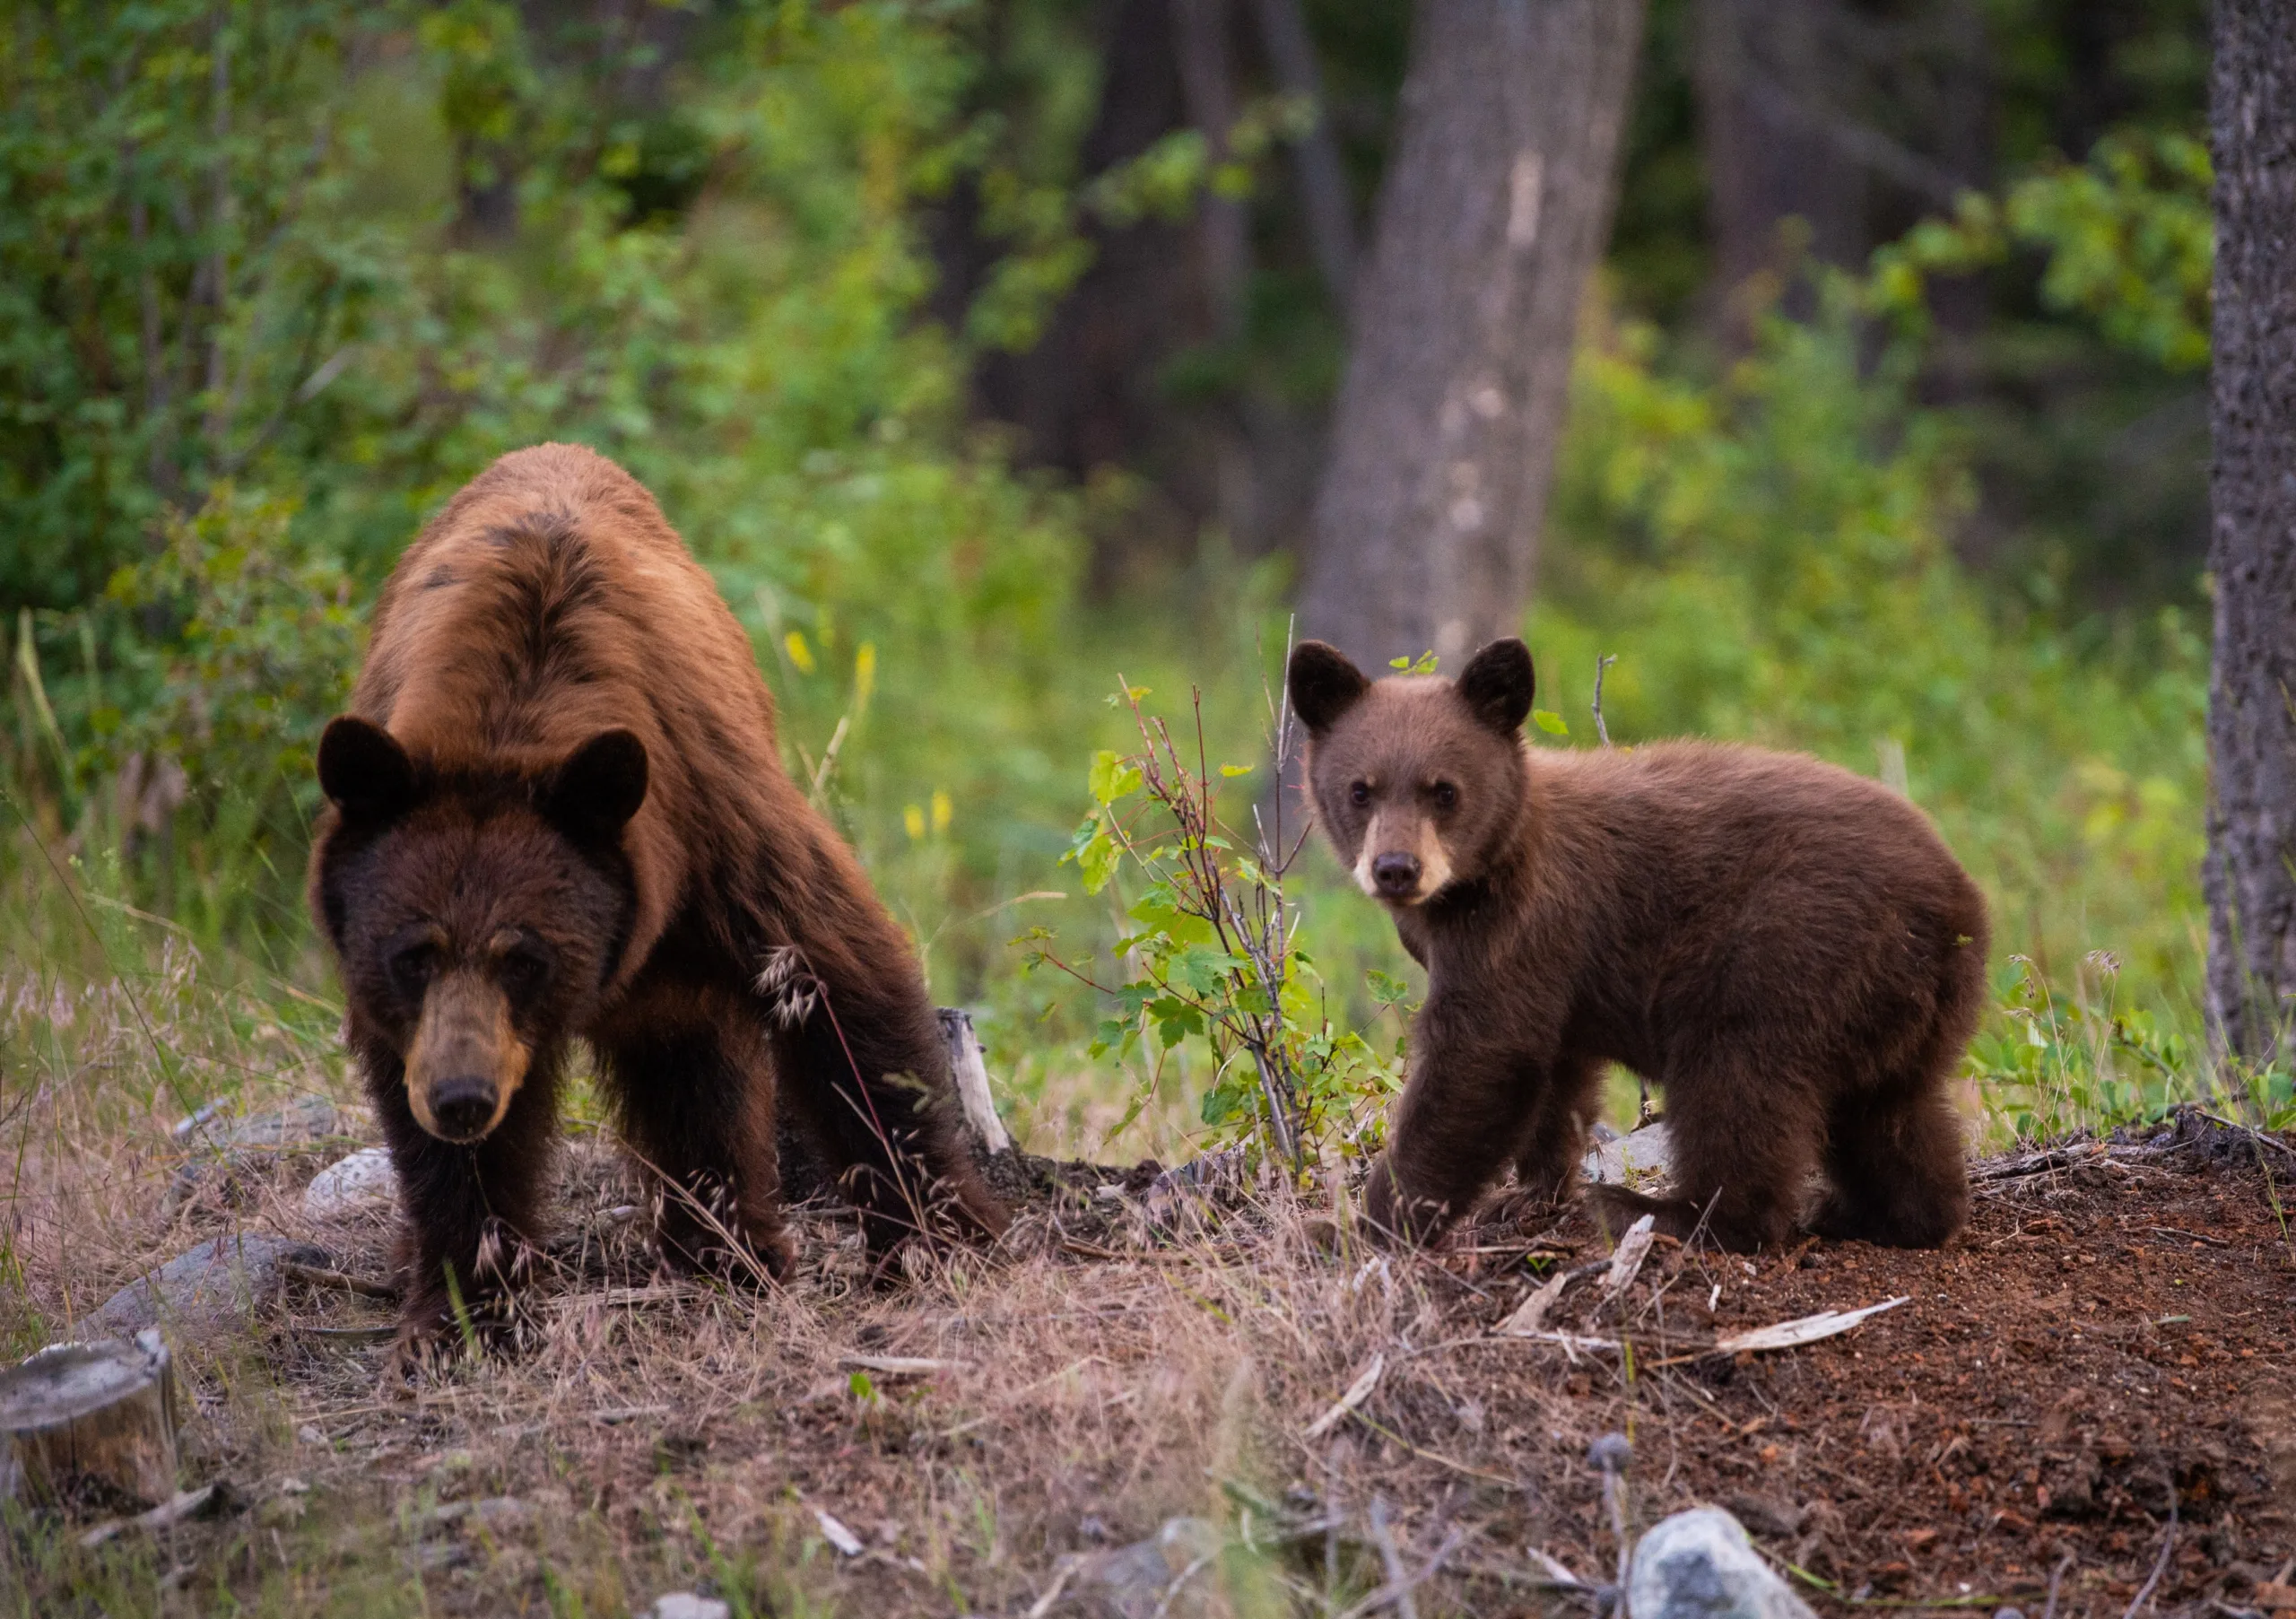 A momma bear and her cub, browsing around in the Boulder Valley, Montana.